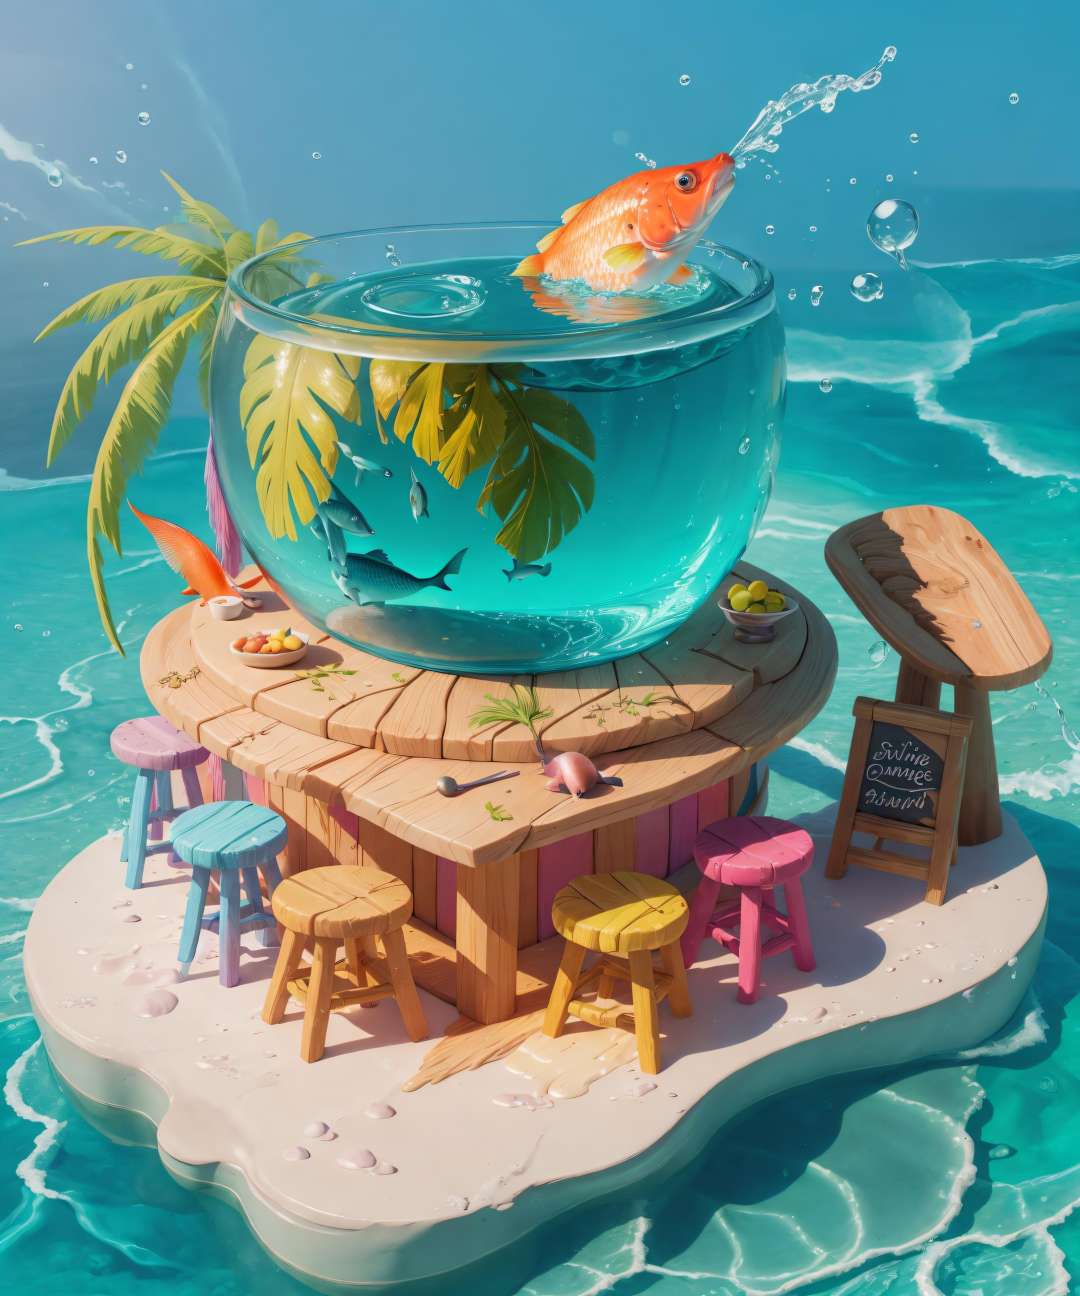 (masterpiece, best quality:1.3, 3d, highres, ultra-detailed, 8k, 85mm, centered, tilt shift, <lora:ISO_SHOP-18:0.9>, iso_shop, (isometric:1.3),  food, bottle, ocean, water, fish, cooking, cutting board, (small details), (extremely detailed), [hyperrealistic:0.2], bloom, (colorful), [[[sky]]], (sign:1.2), fish shop,  vivid, (UHDR), sunlight, (tropical), cute, [pastel colors], vivid, cinematic, [film grain:0.7], [table, chair], [small decorations], [beer:0.5], [bowl], [flower:0.4], multicolored theme, natural lighting, dreamy, reflection, water, nature